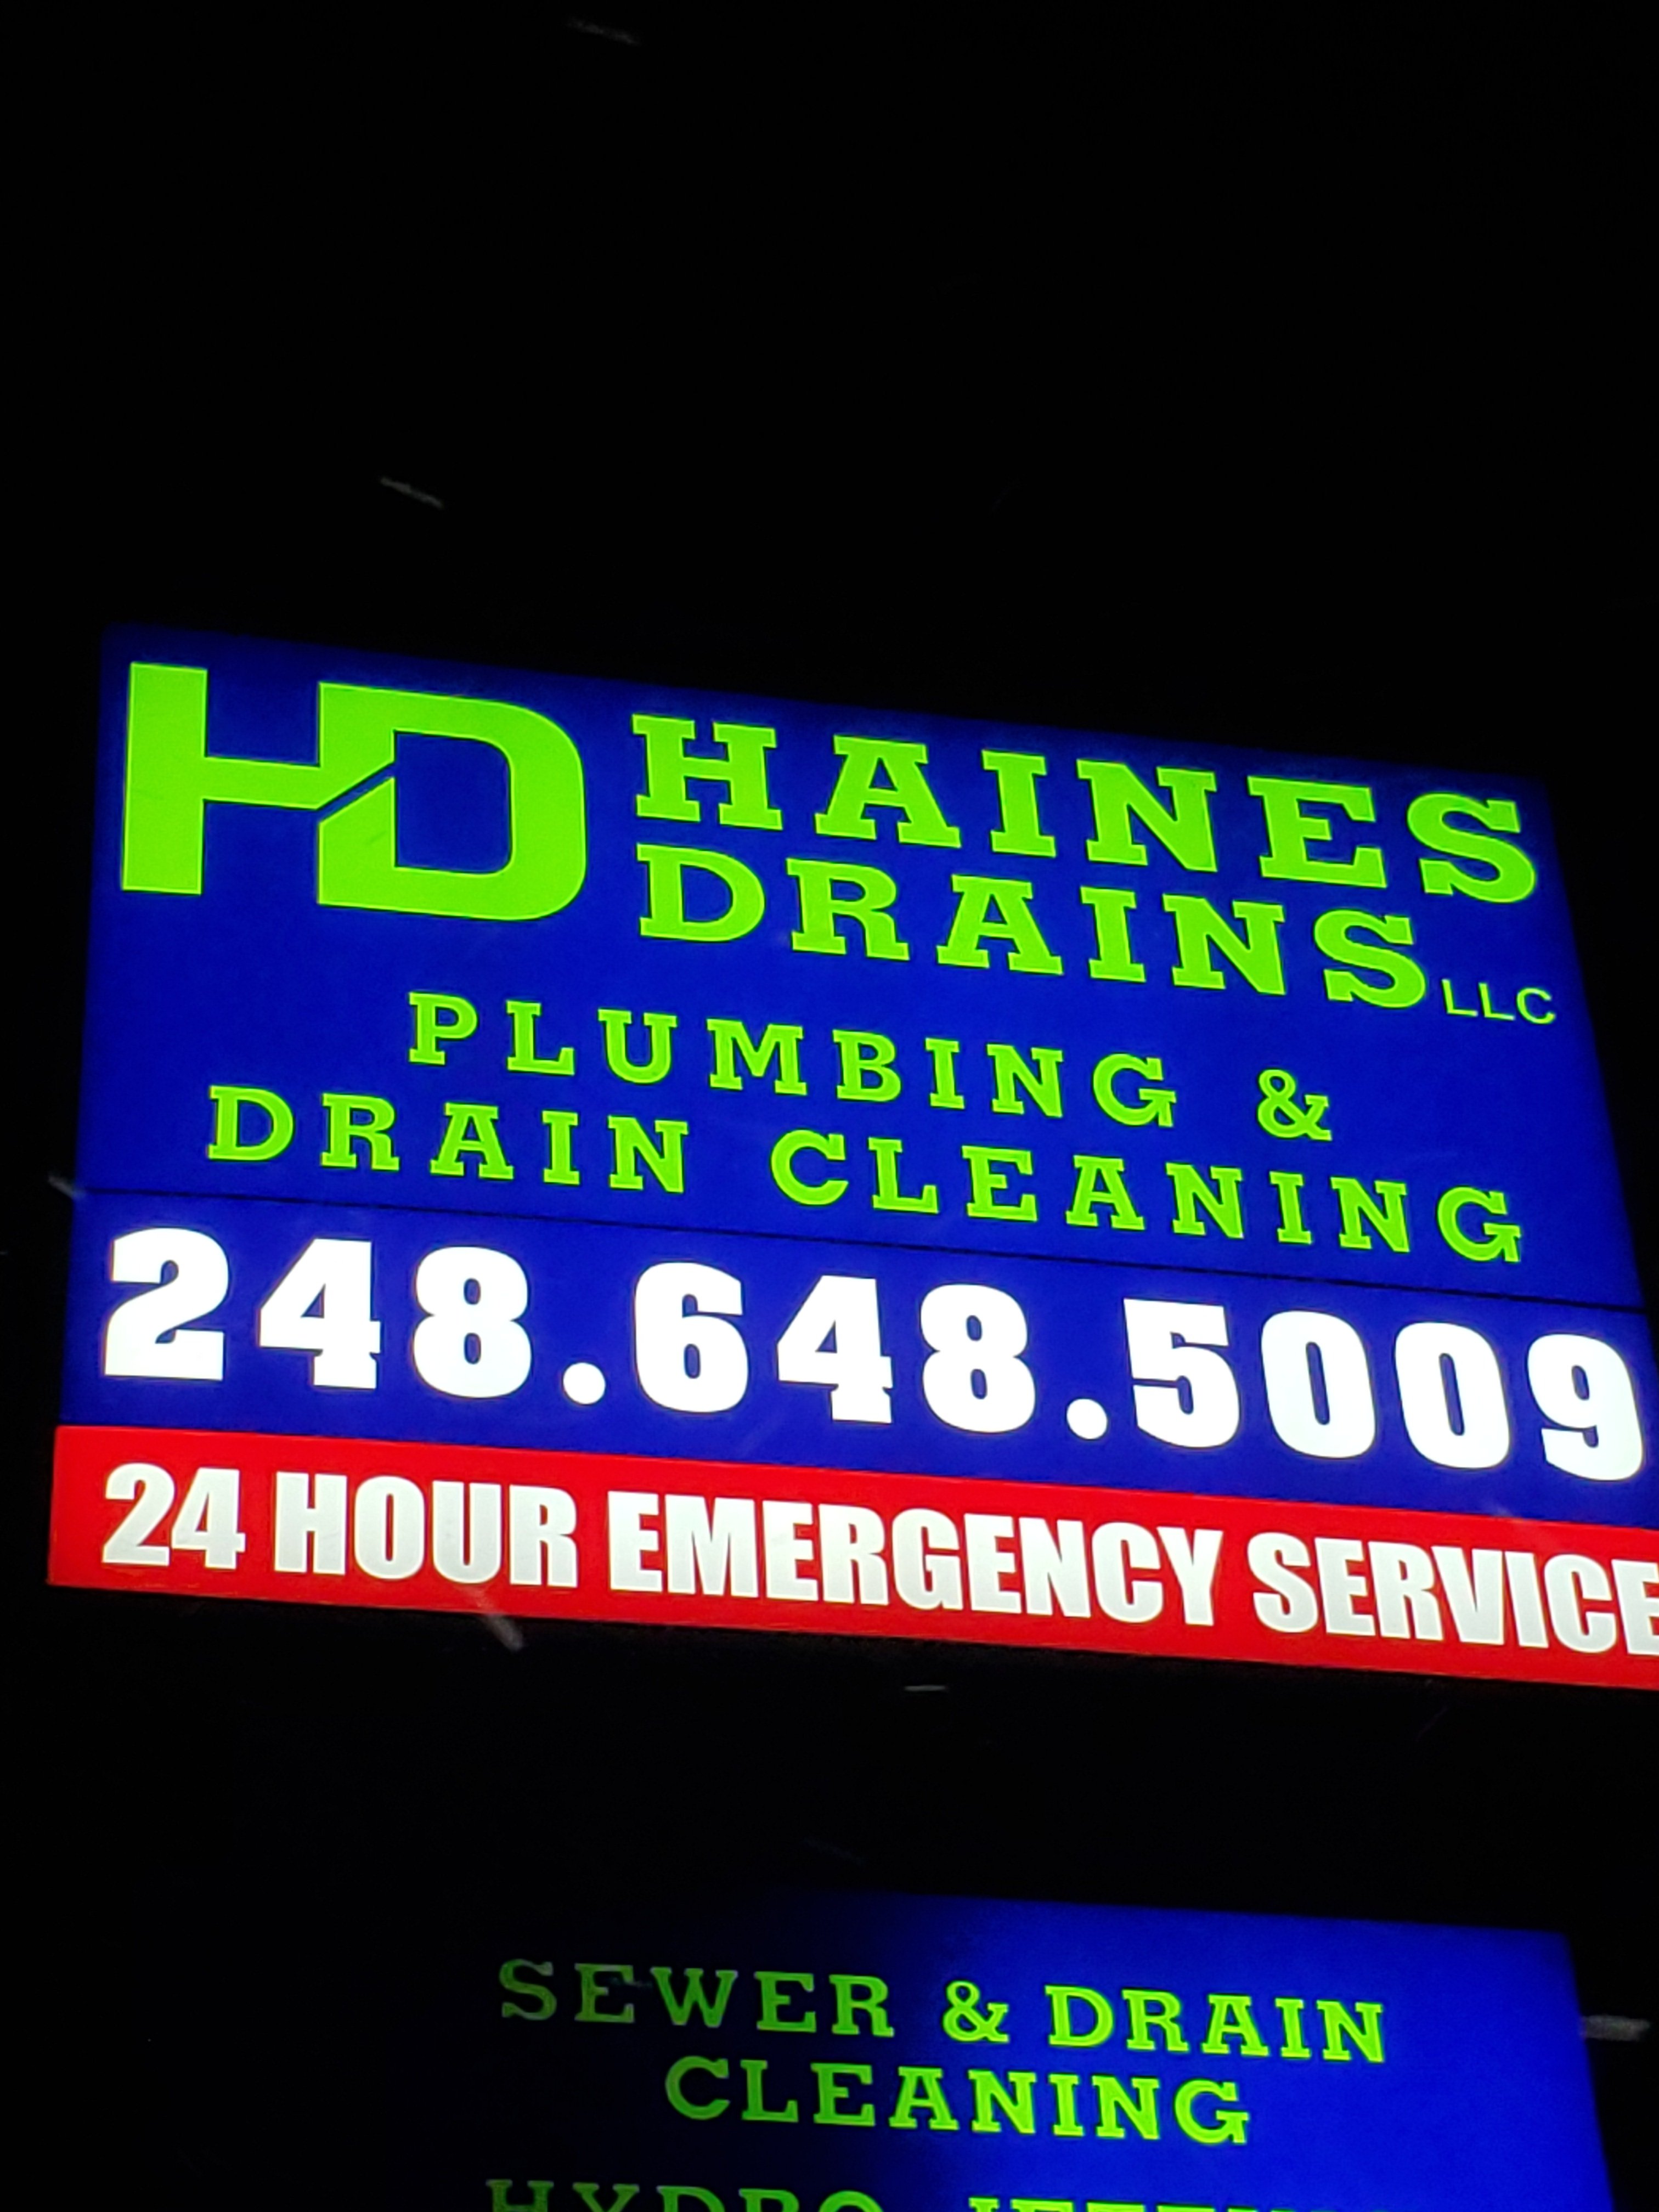 Haines Drains Plumbing and Drain Cleaning Specialist LLC Logo